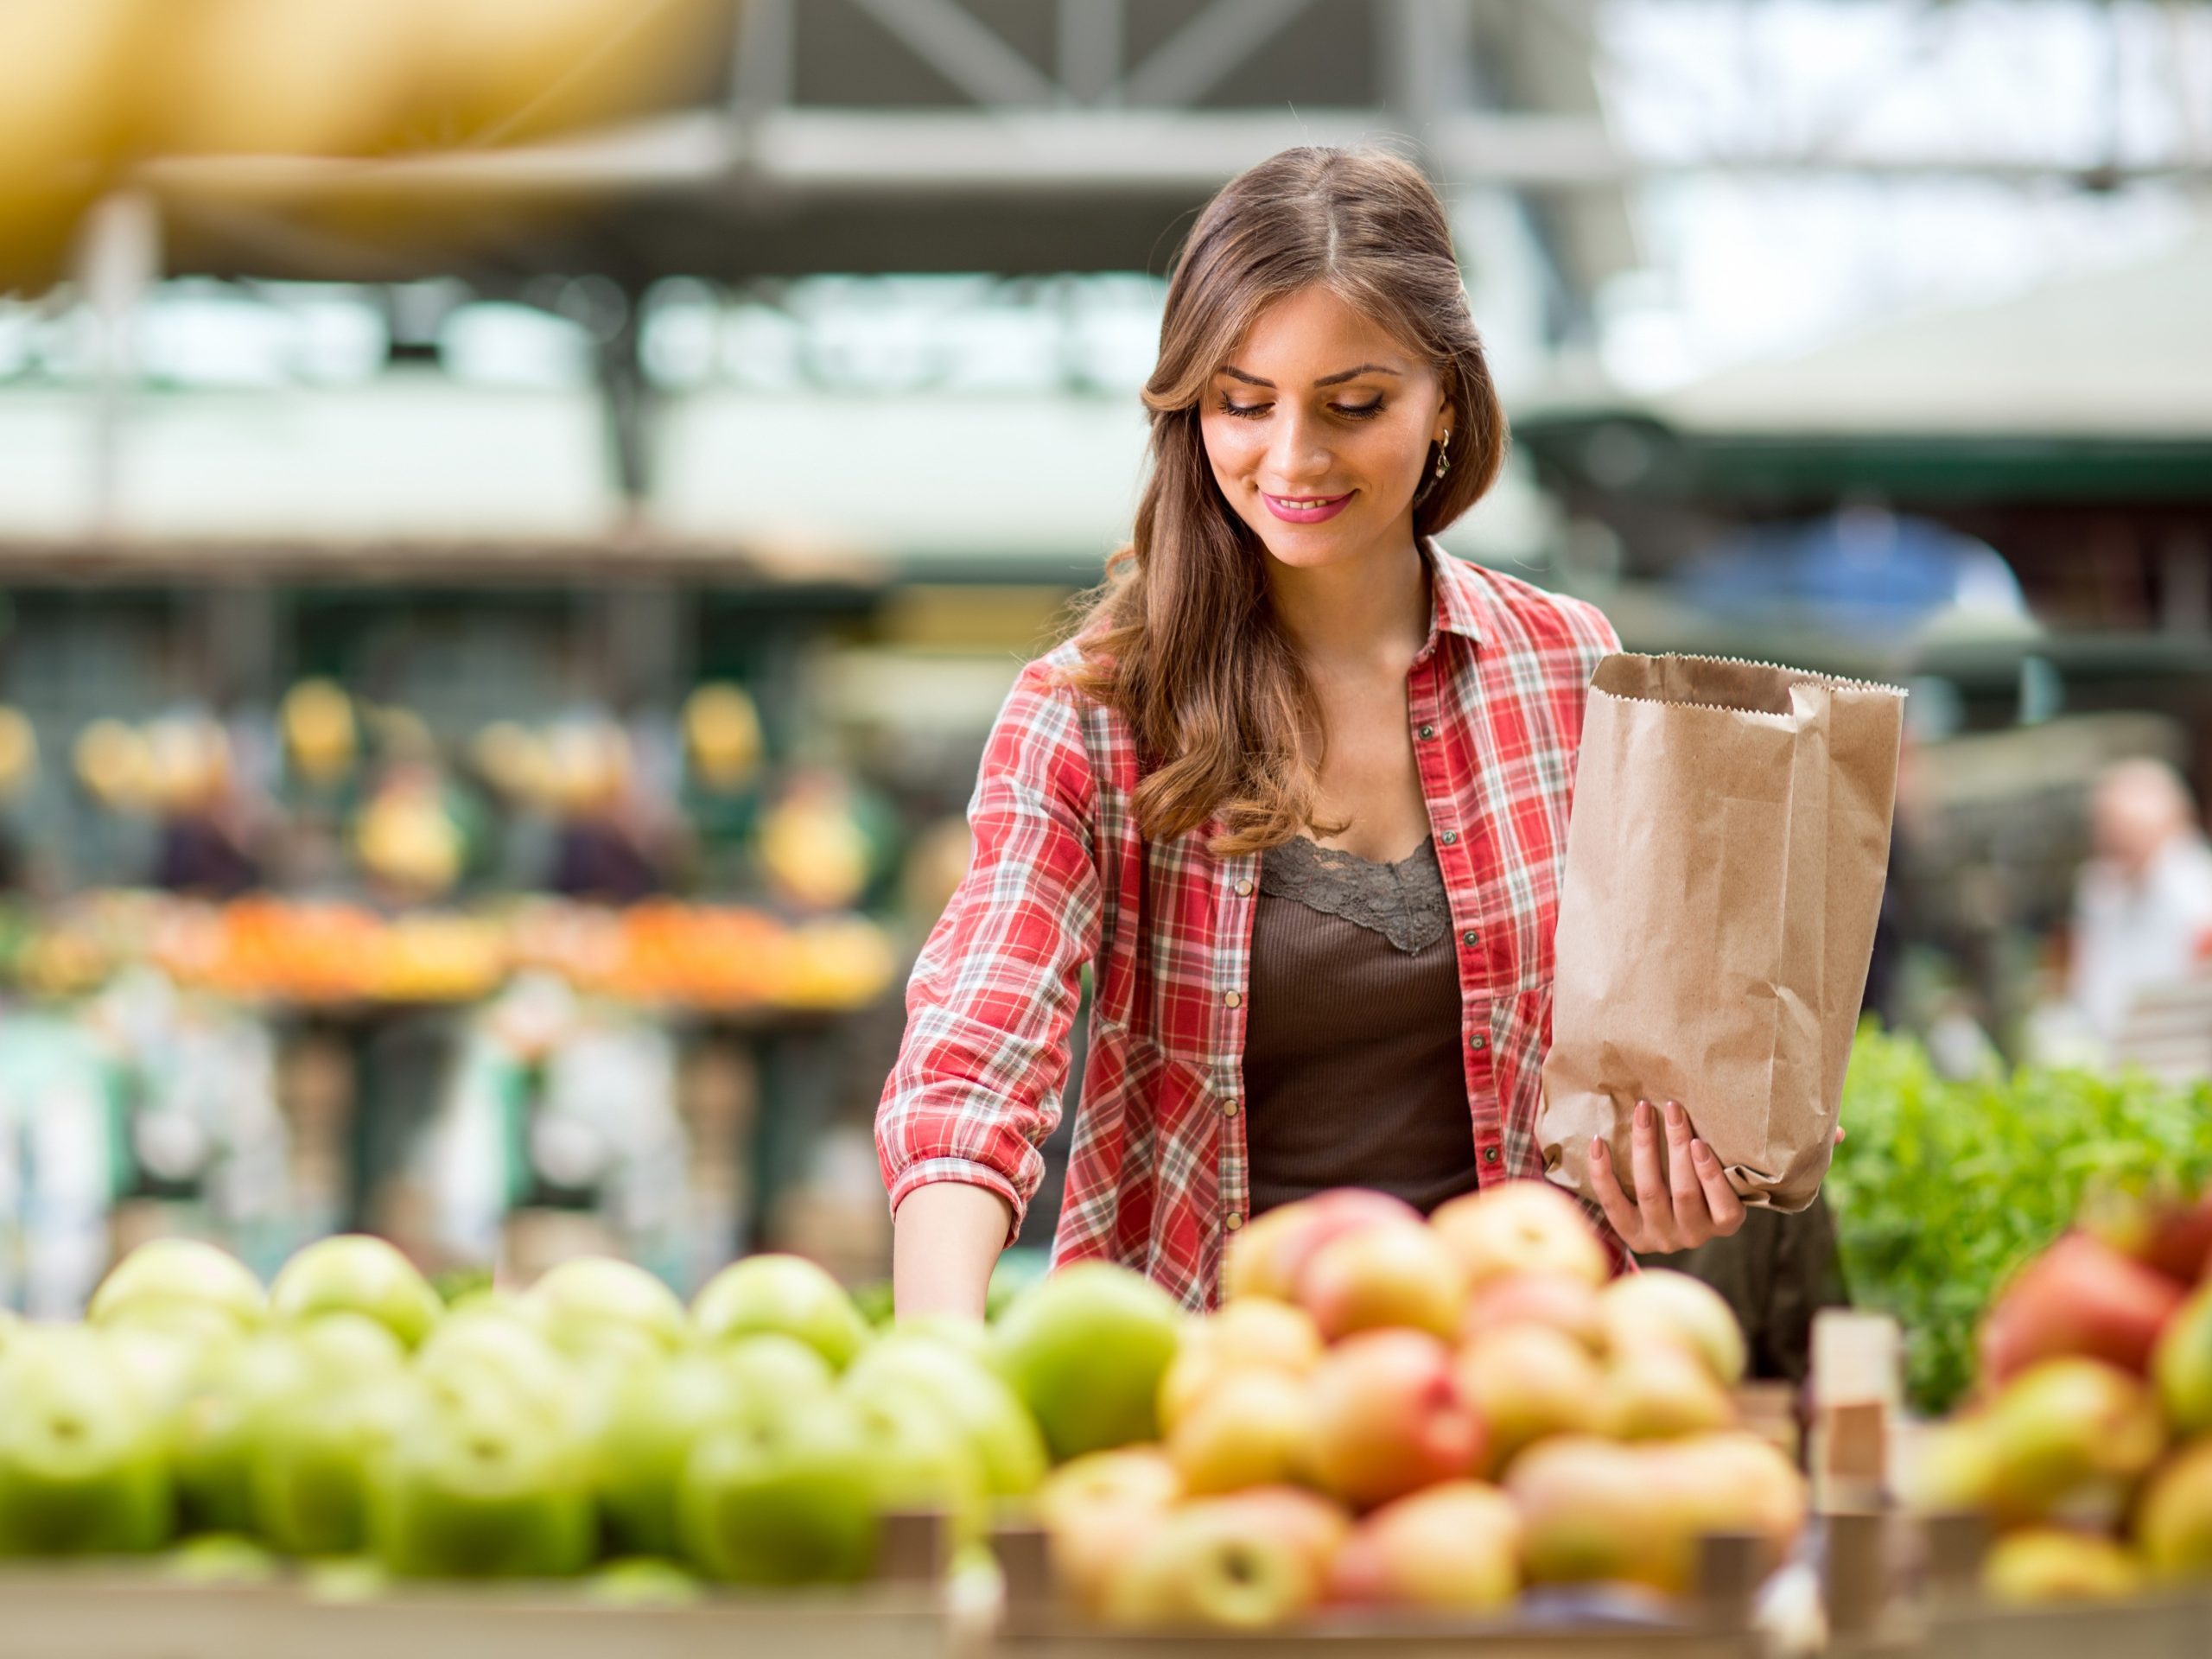 NSW DPI is collaborating with QUT and farmers state-wide in research that aims to establish what drives consumers' fresh-produce purchases – knowledge growers can use to craft personalised marketing messages.